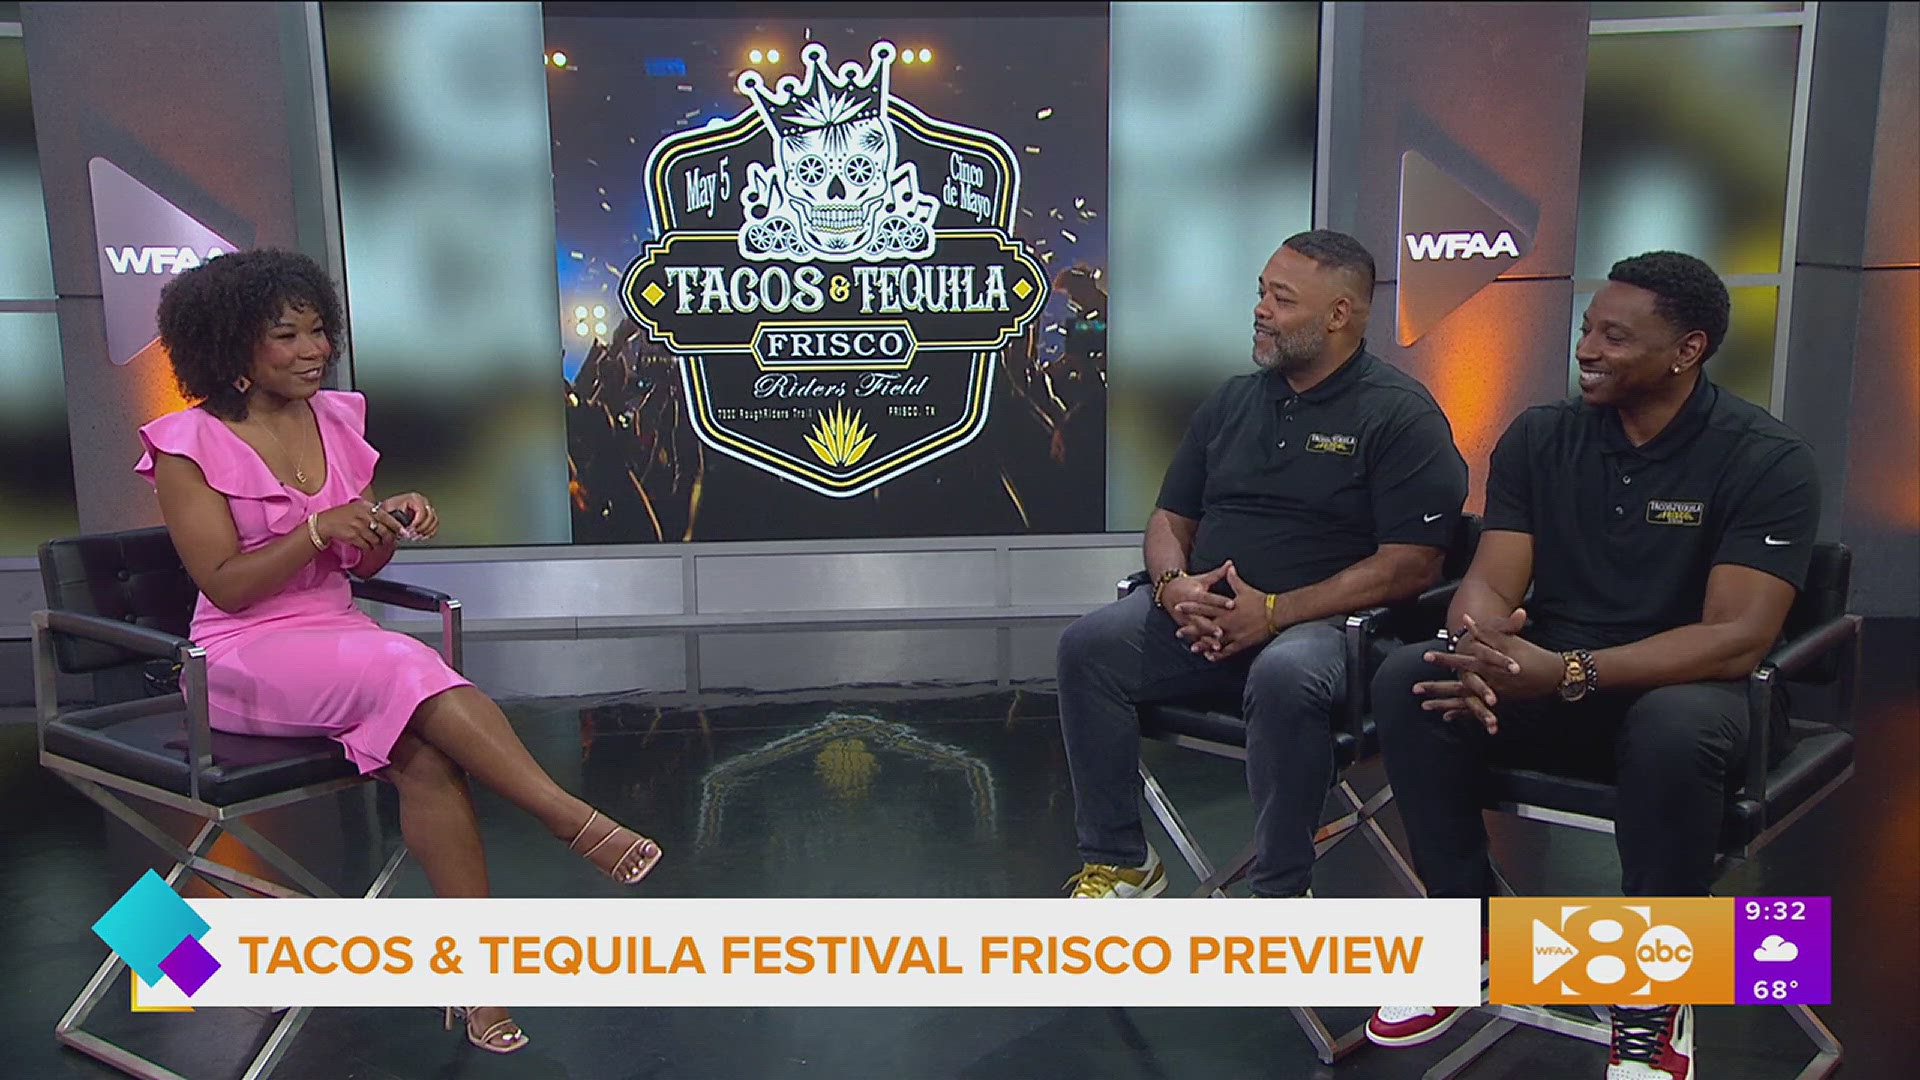 Jason Williams and Lucas Michael Payne of J&L Events give us a preview of Tacos & Tequila Festival Frisco on May 5 that includes Grammy winning artist 2 Chainz